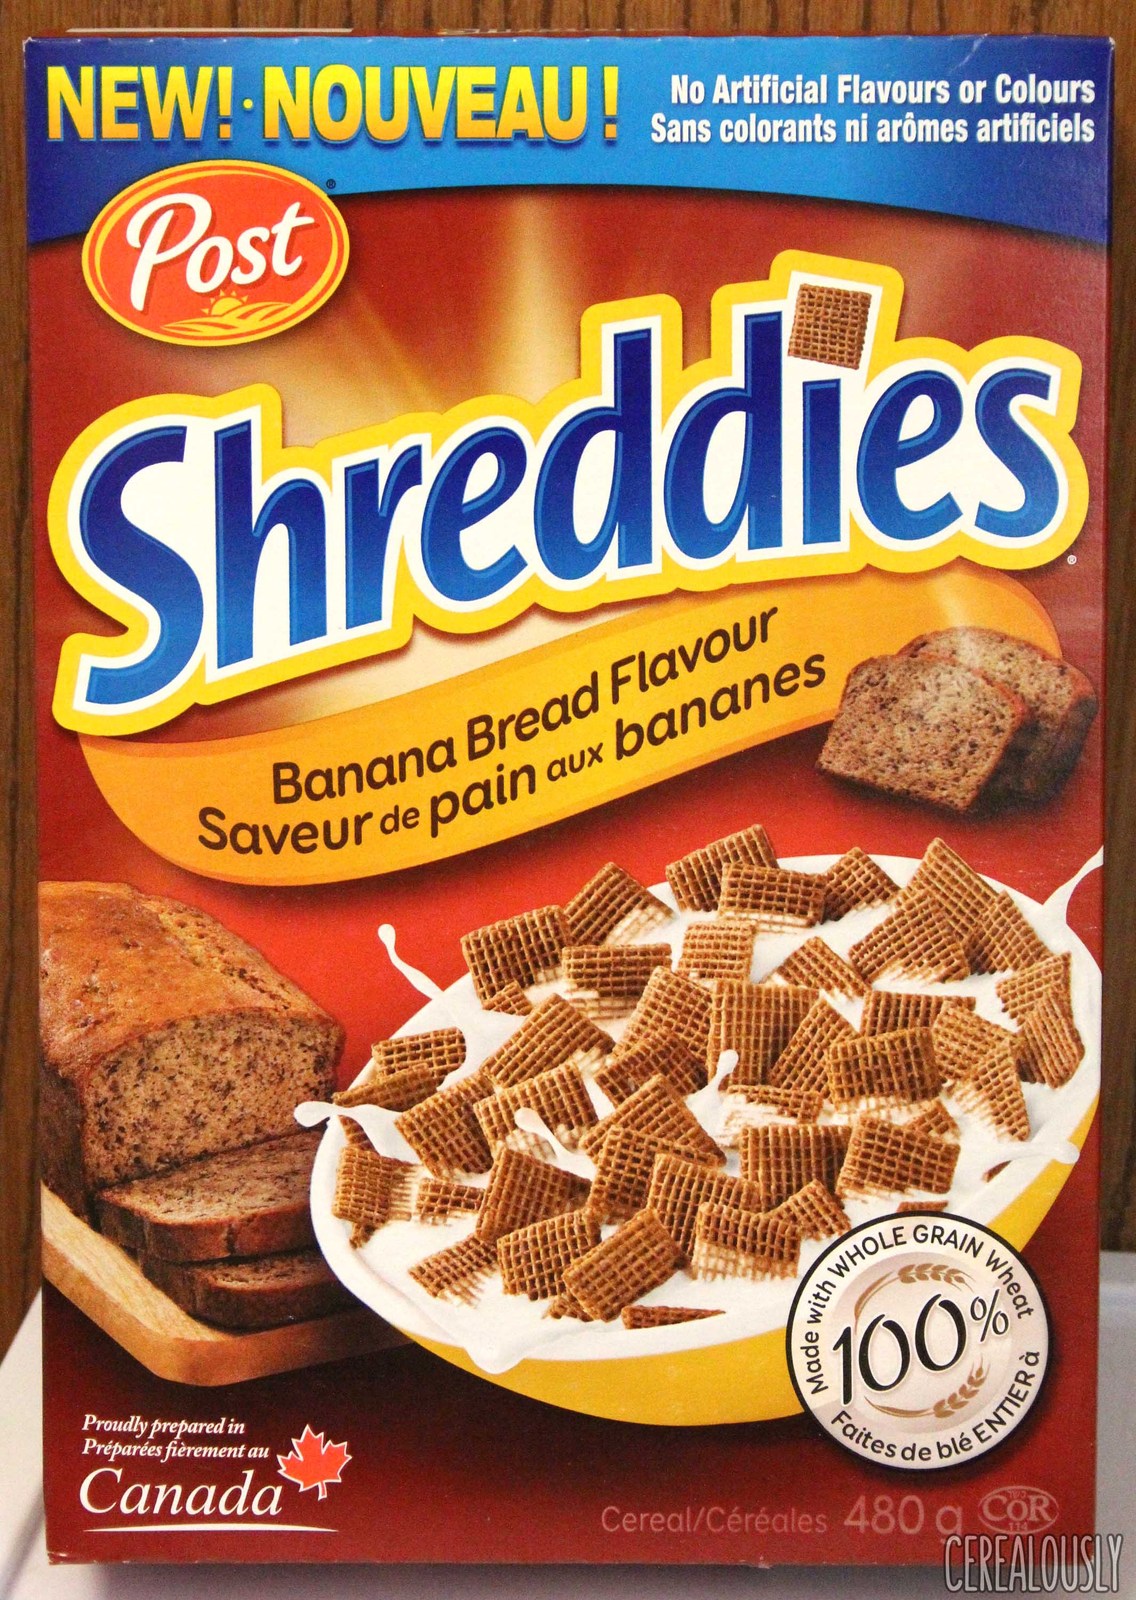 Shreddies Banana Bread Flavour Cereal 4 boxes Truly Canadian - Cereals ...